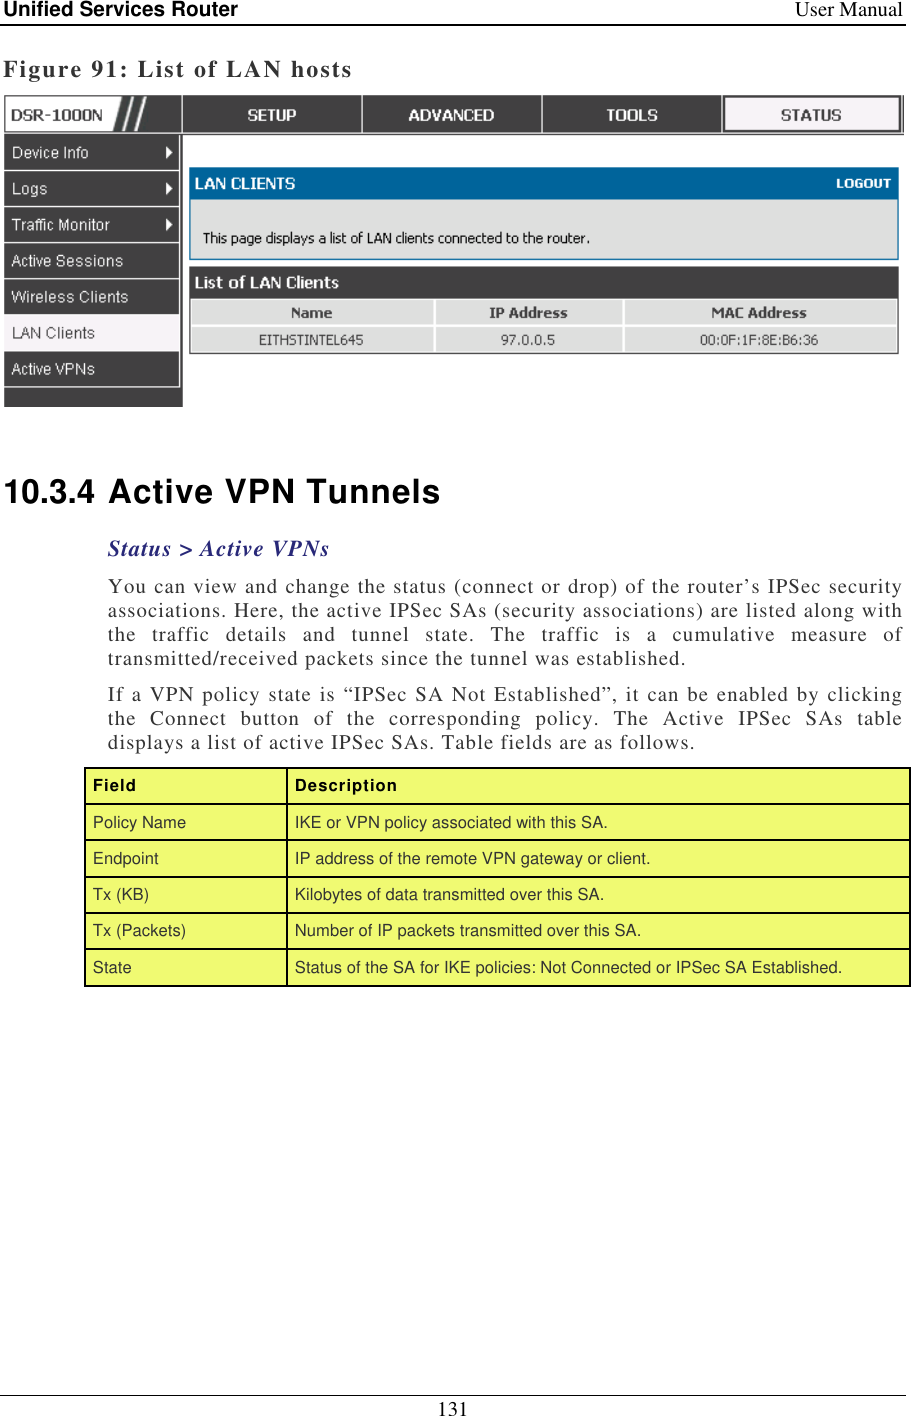 Unified Services Router    User Manual 131  Figure 91: List of LAN hosts   10.3.4 Active VPN Tunnels Status &gt; Active VPNs You can view and change the status (connect or drop) of the router’s IPSec security associations. Here, the active IPSec SAs (security associations) are listed along with the  traffic  details  and  tunnel  state.  The  traffic  is  a  cumulative  measure  of transmitted/received packets since the tunnel was established.  If a VPN policy state is “IPSec SA Not Established”, it can be enabled by clicking the  Connect  button  of  the  corresponding  policy.  The  Active  IPSec  SAs  table displays a list of active IPSec SAs. Table fields are as follows. Field   Description Policy Name  IKE or VPN policy associated with this SA. Endpoint  IP address of the remote VPN gateway or client. Tx (KB)  Kilobytes of data transmitted over this SA. Tx (Packets)  Number of IP packets transmitted over this SA. State  Status of the SA for IKE policies: Not Connected or IPSec SA Established. 